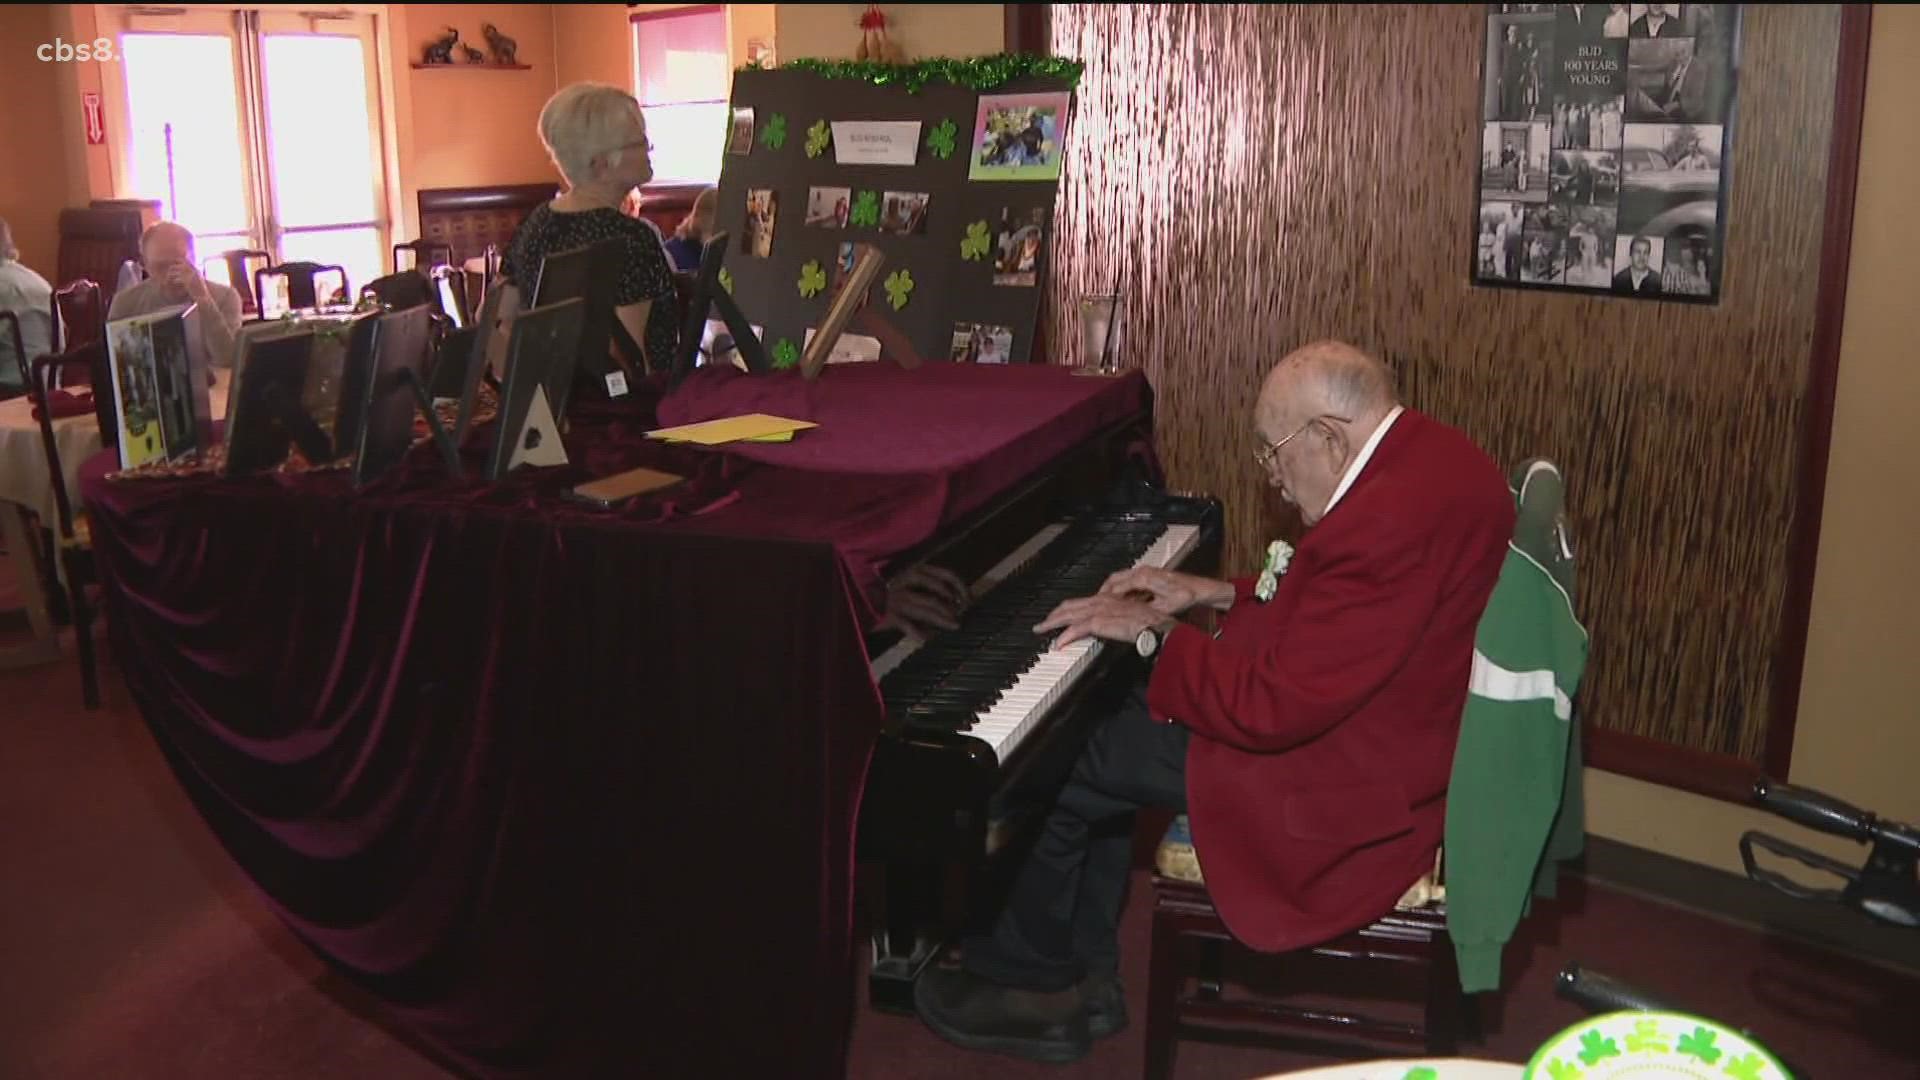 At 102 years old, WWII vet Bud Roberds still plays the piano weekly at Peking Wok Restaurant.